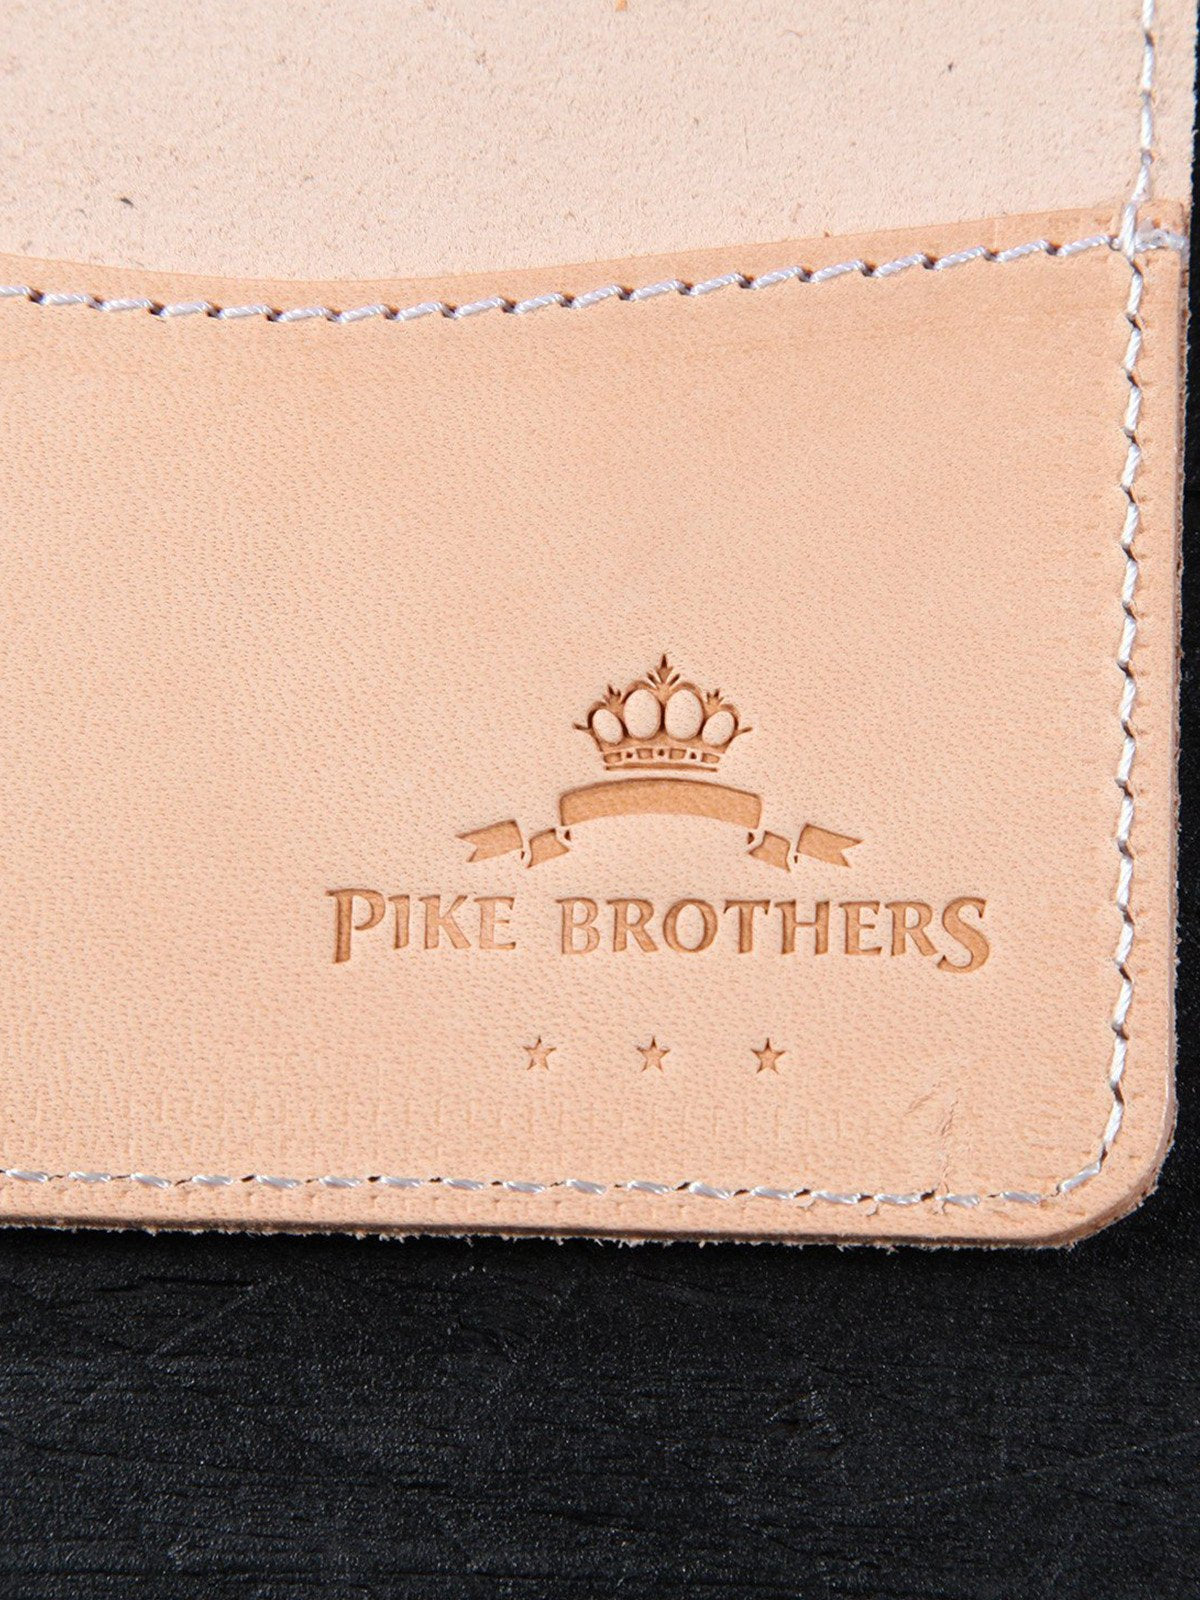 Pike Bros 1965 Leather Cardholder